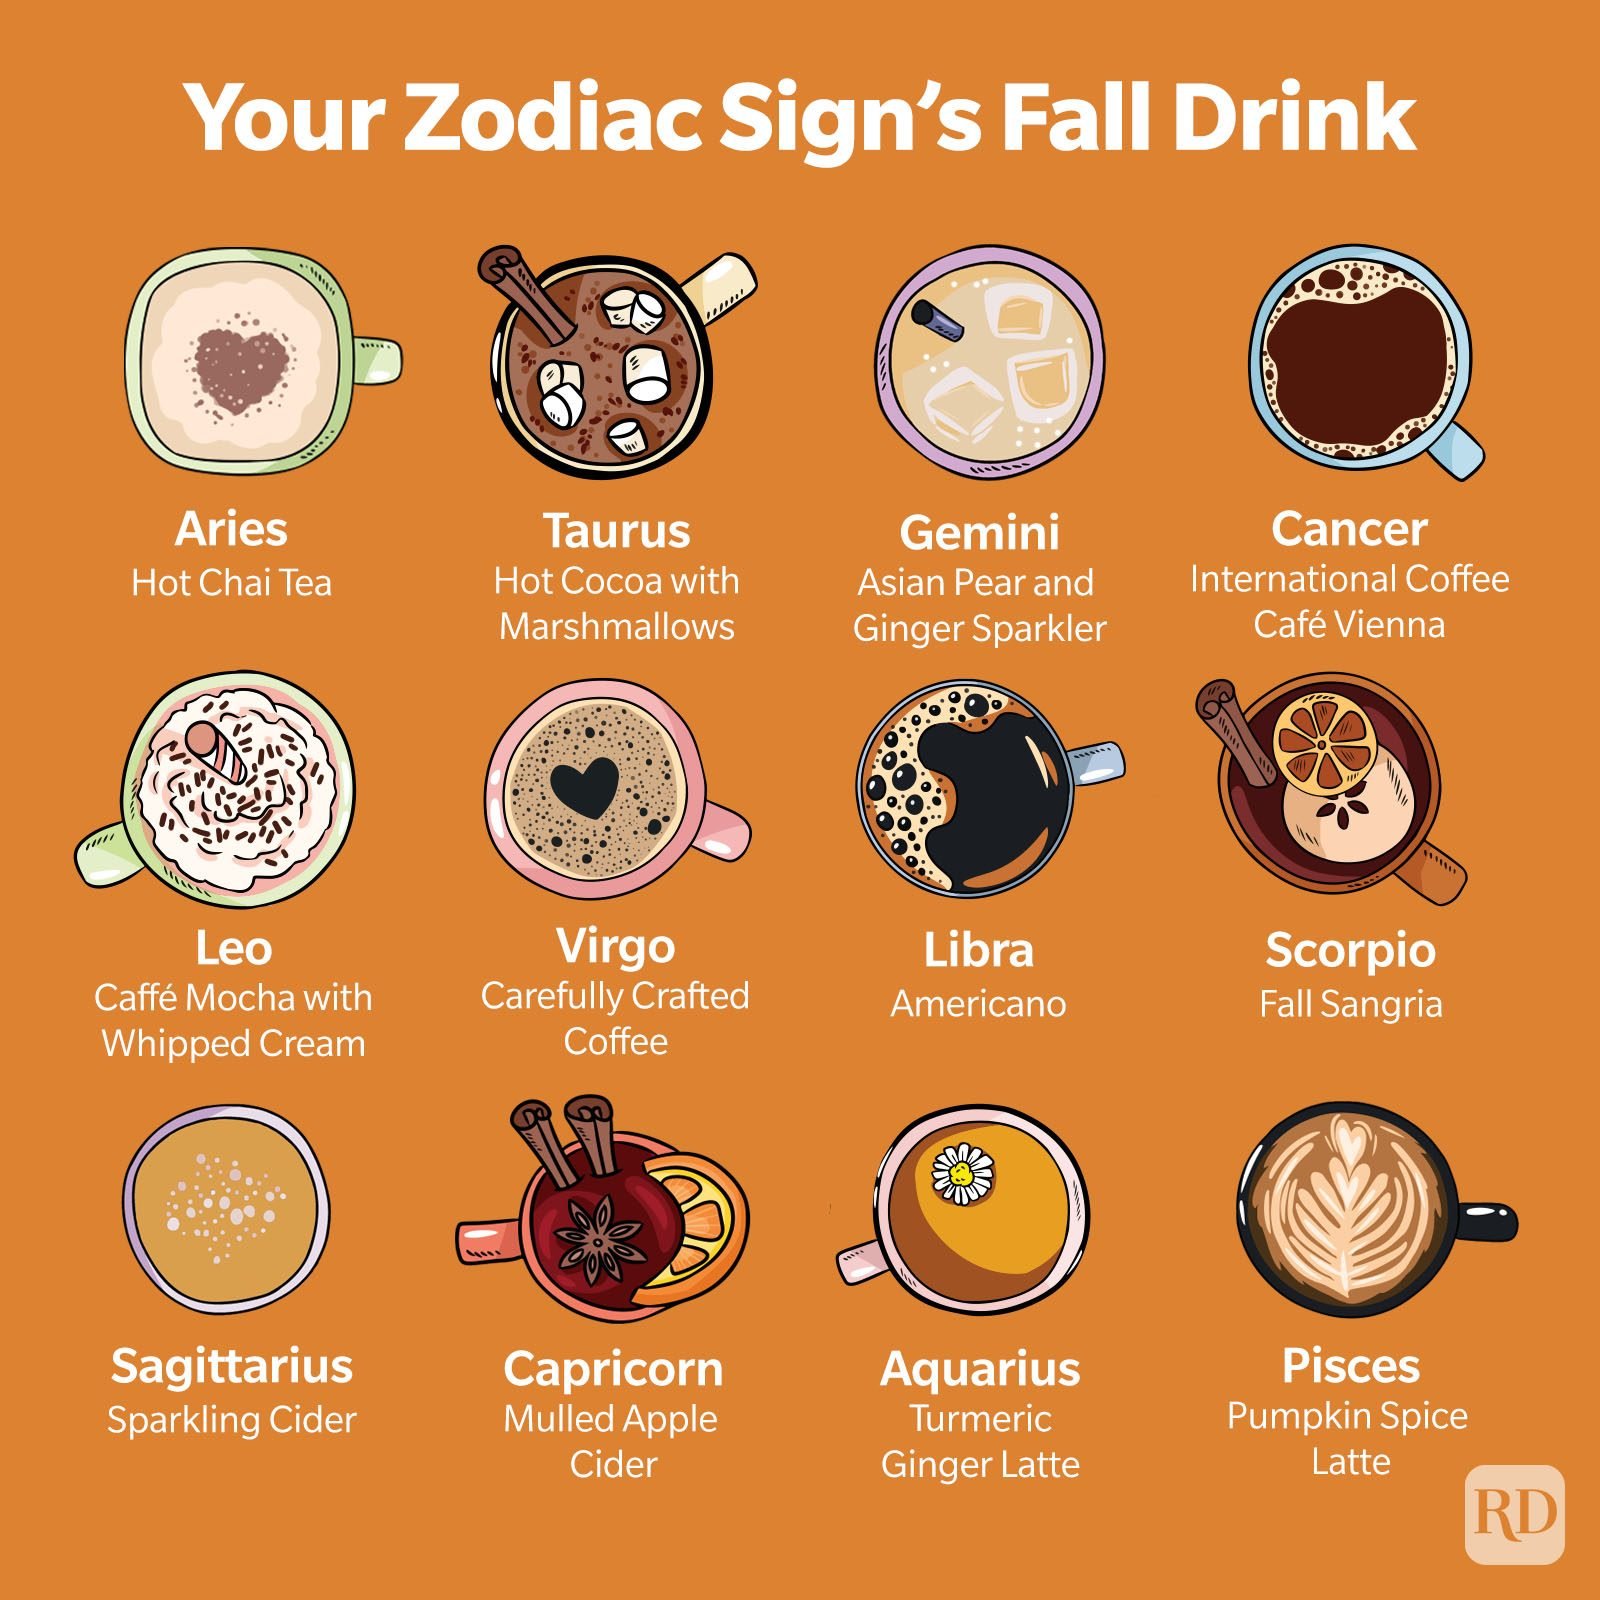 https://www.rd.com/wp-content/uploads/2021/10/your-zodiacs-fall-drink.jpg?fit=700%2C1024